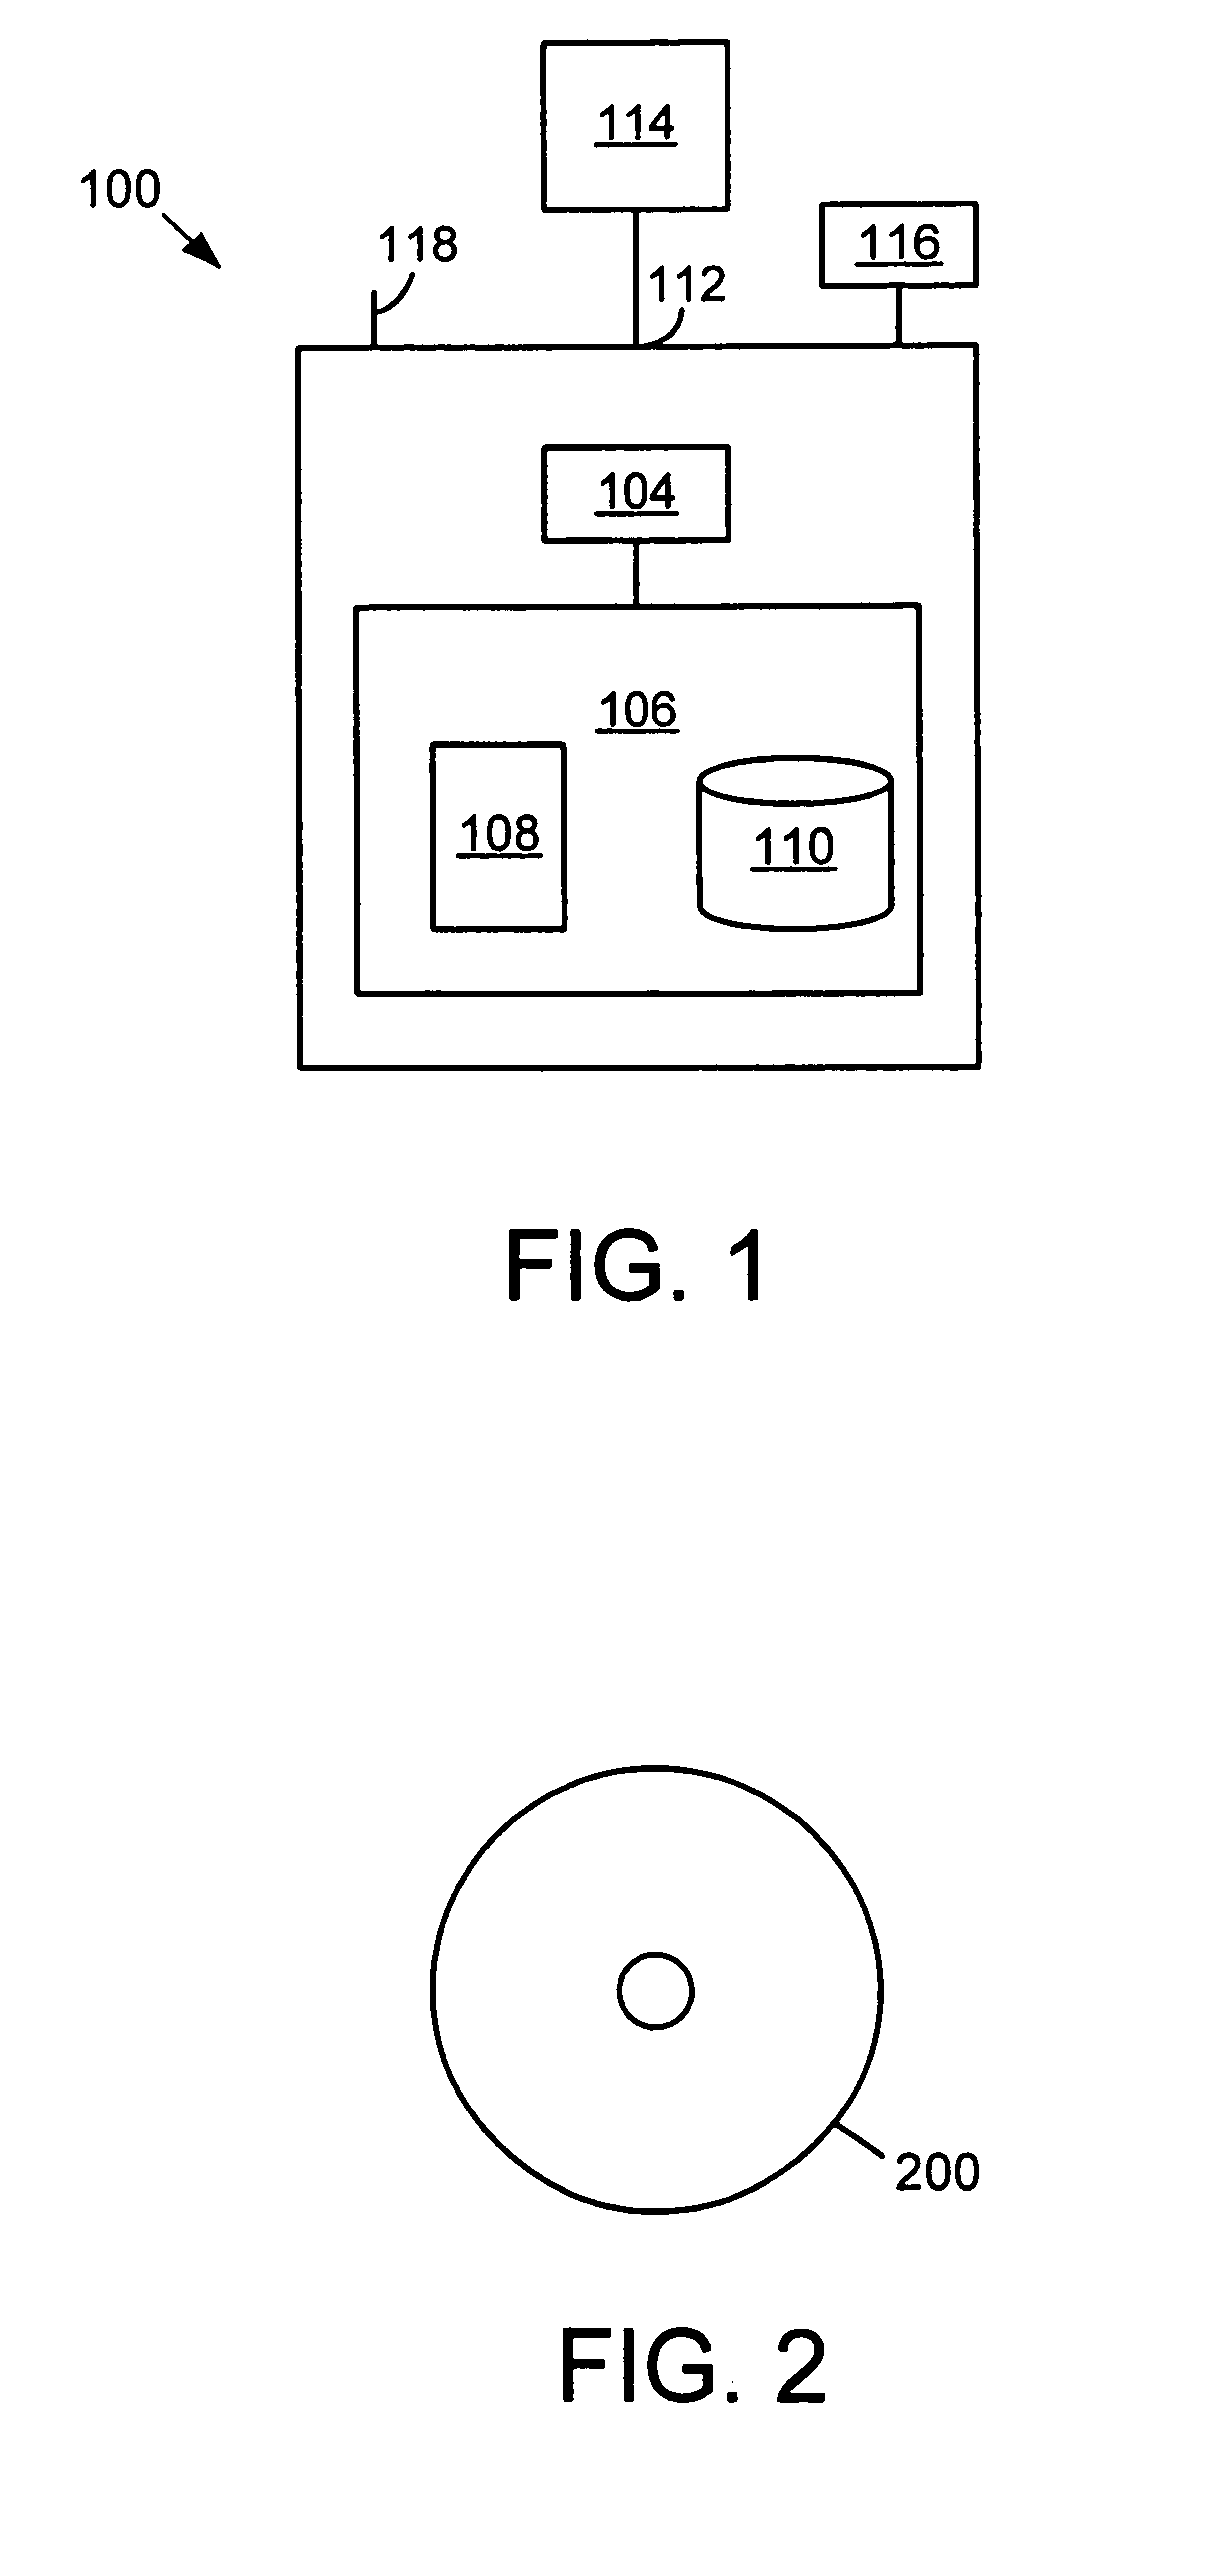 Intelligently interactive profiling system and method